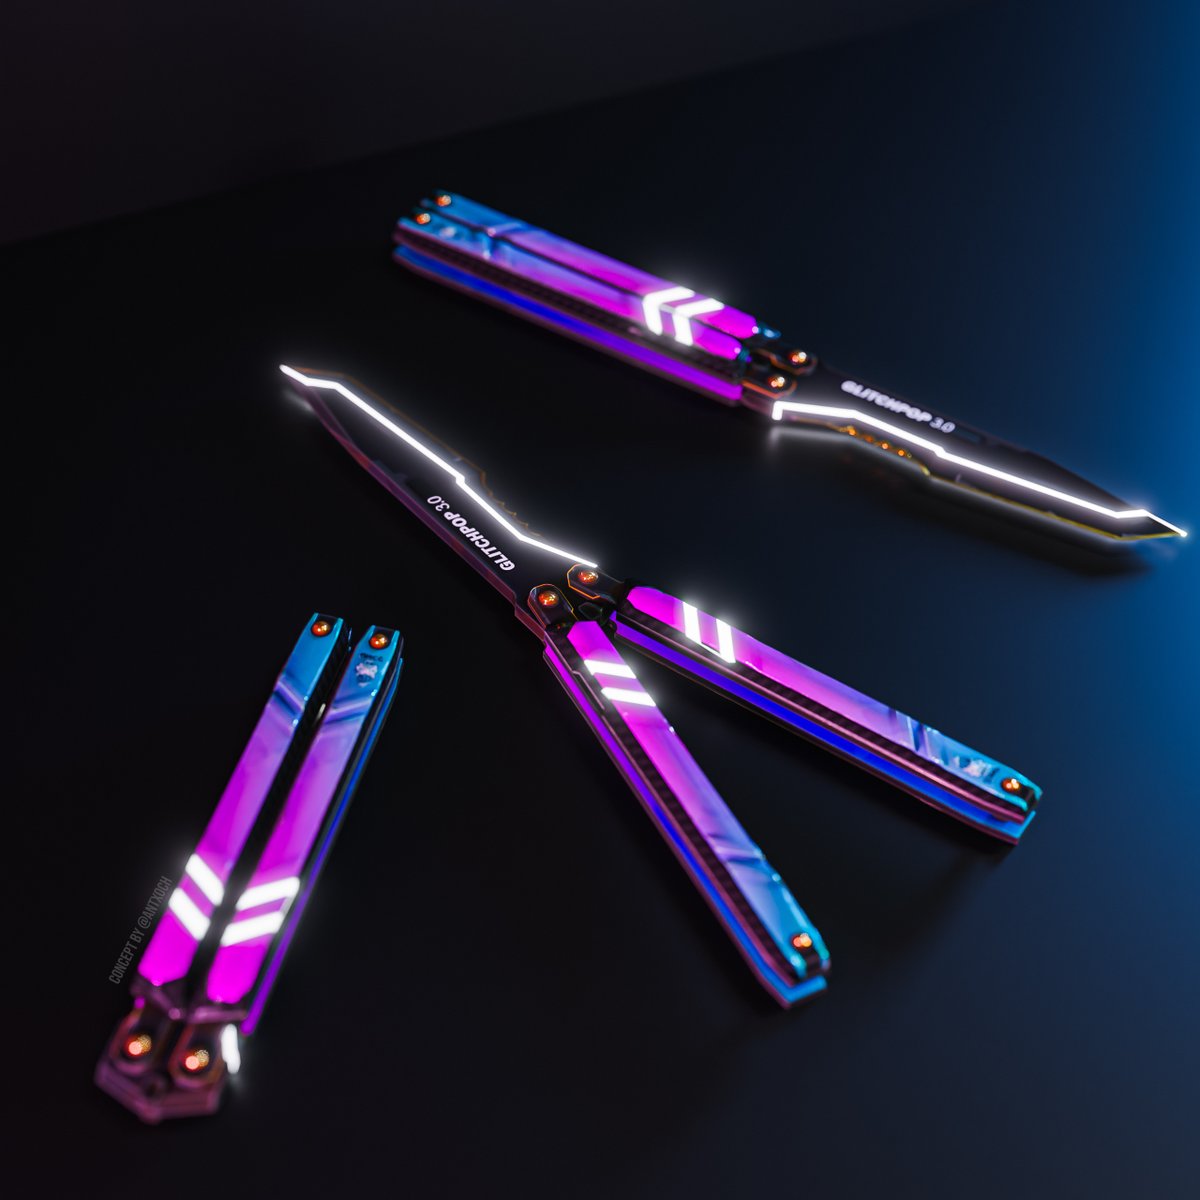 GLITCHPOP Butterfly Knife (CONCEPT)

Support & feedback is appreciated!

#valorant #conceptart #fanart